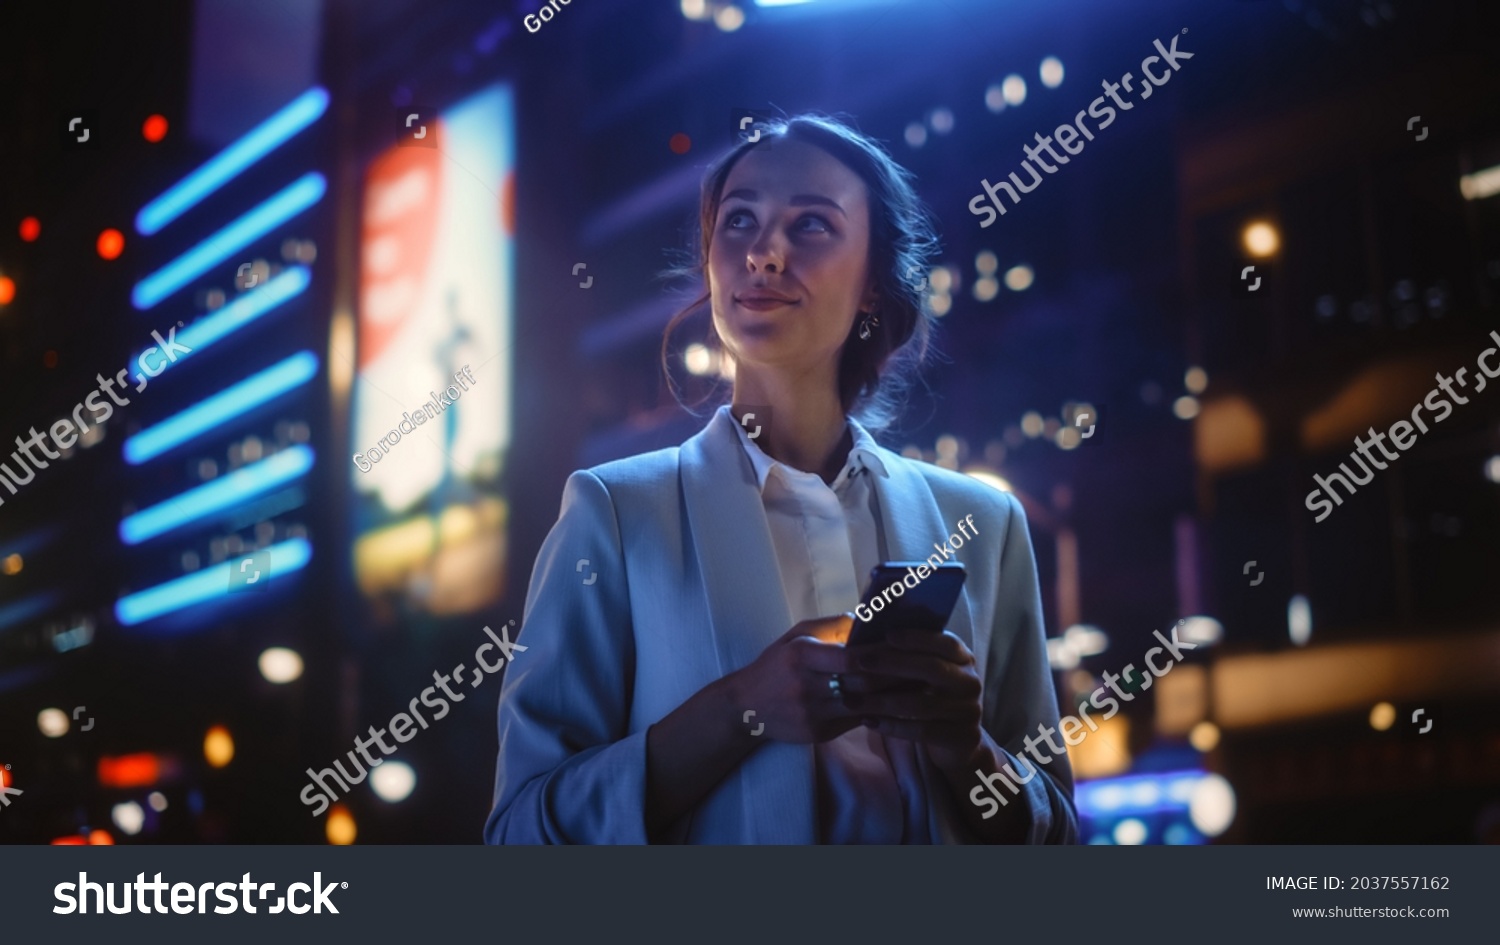 Beautiful Young Woman Using Smartphone Standing on the Night City Street Full of Neon Light. Portrait of Gorgeous Smiling Female Using Mobile Phone. #2037557162